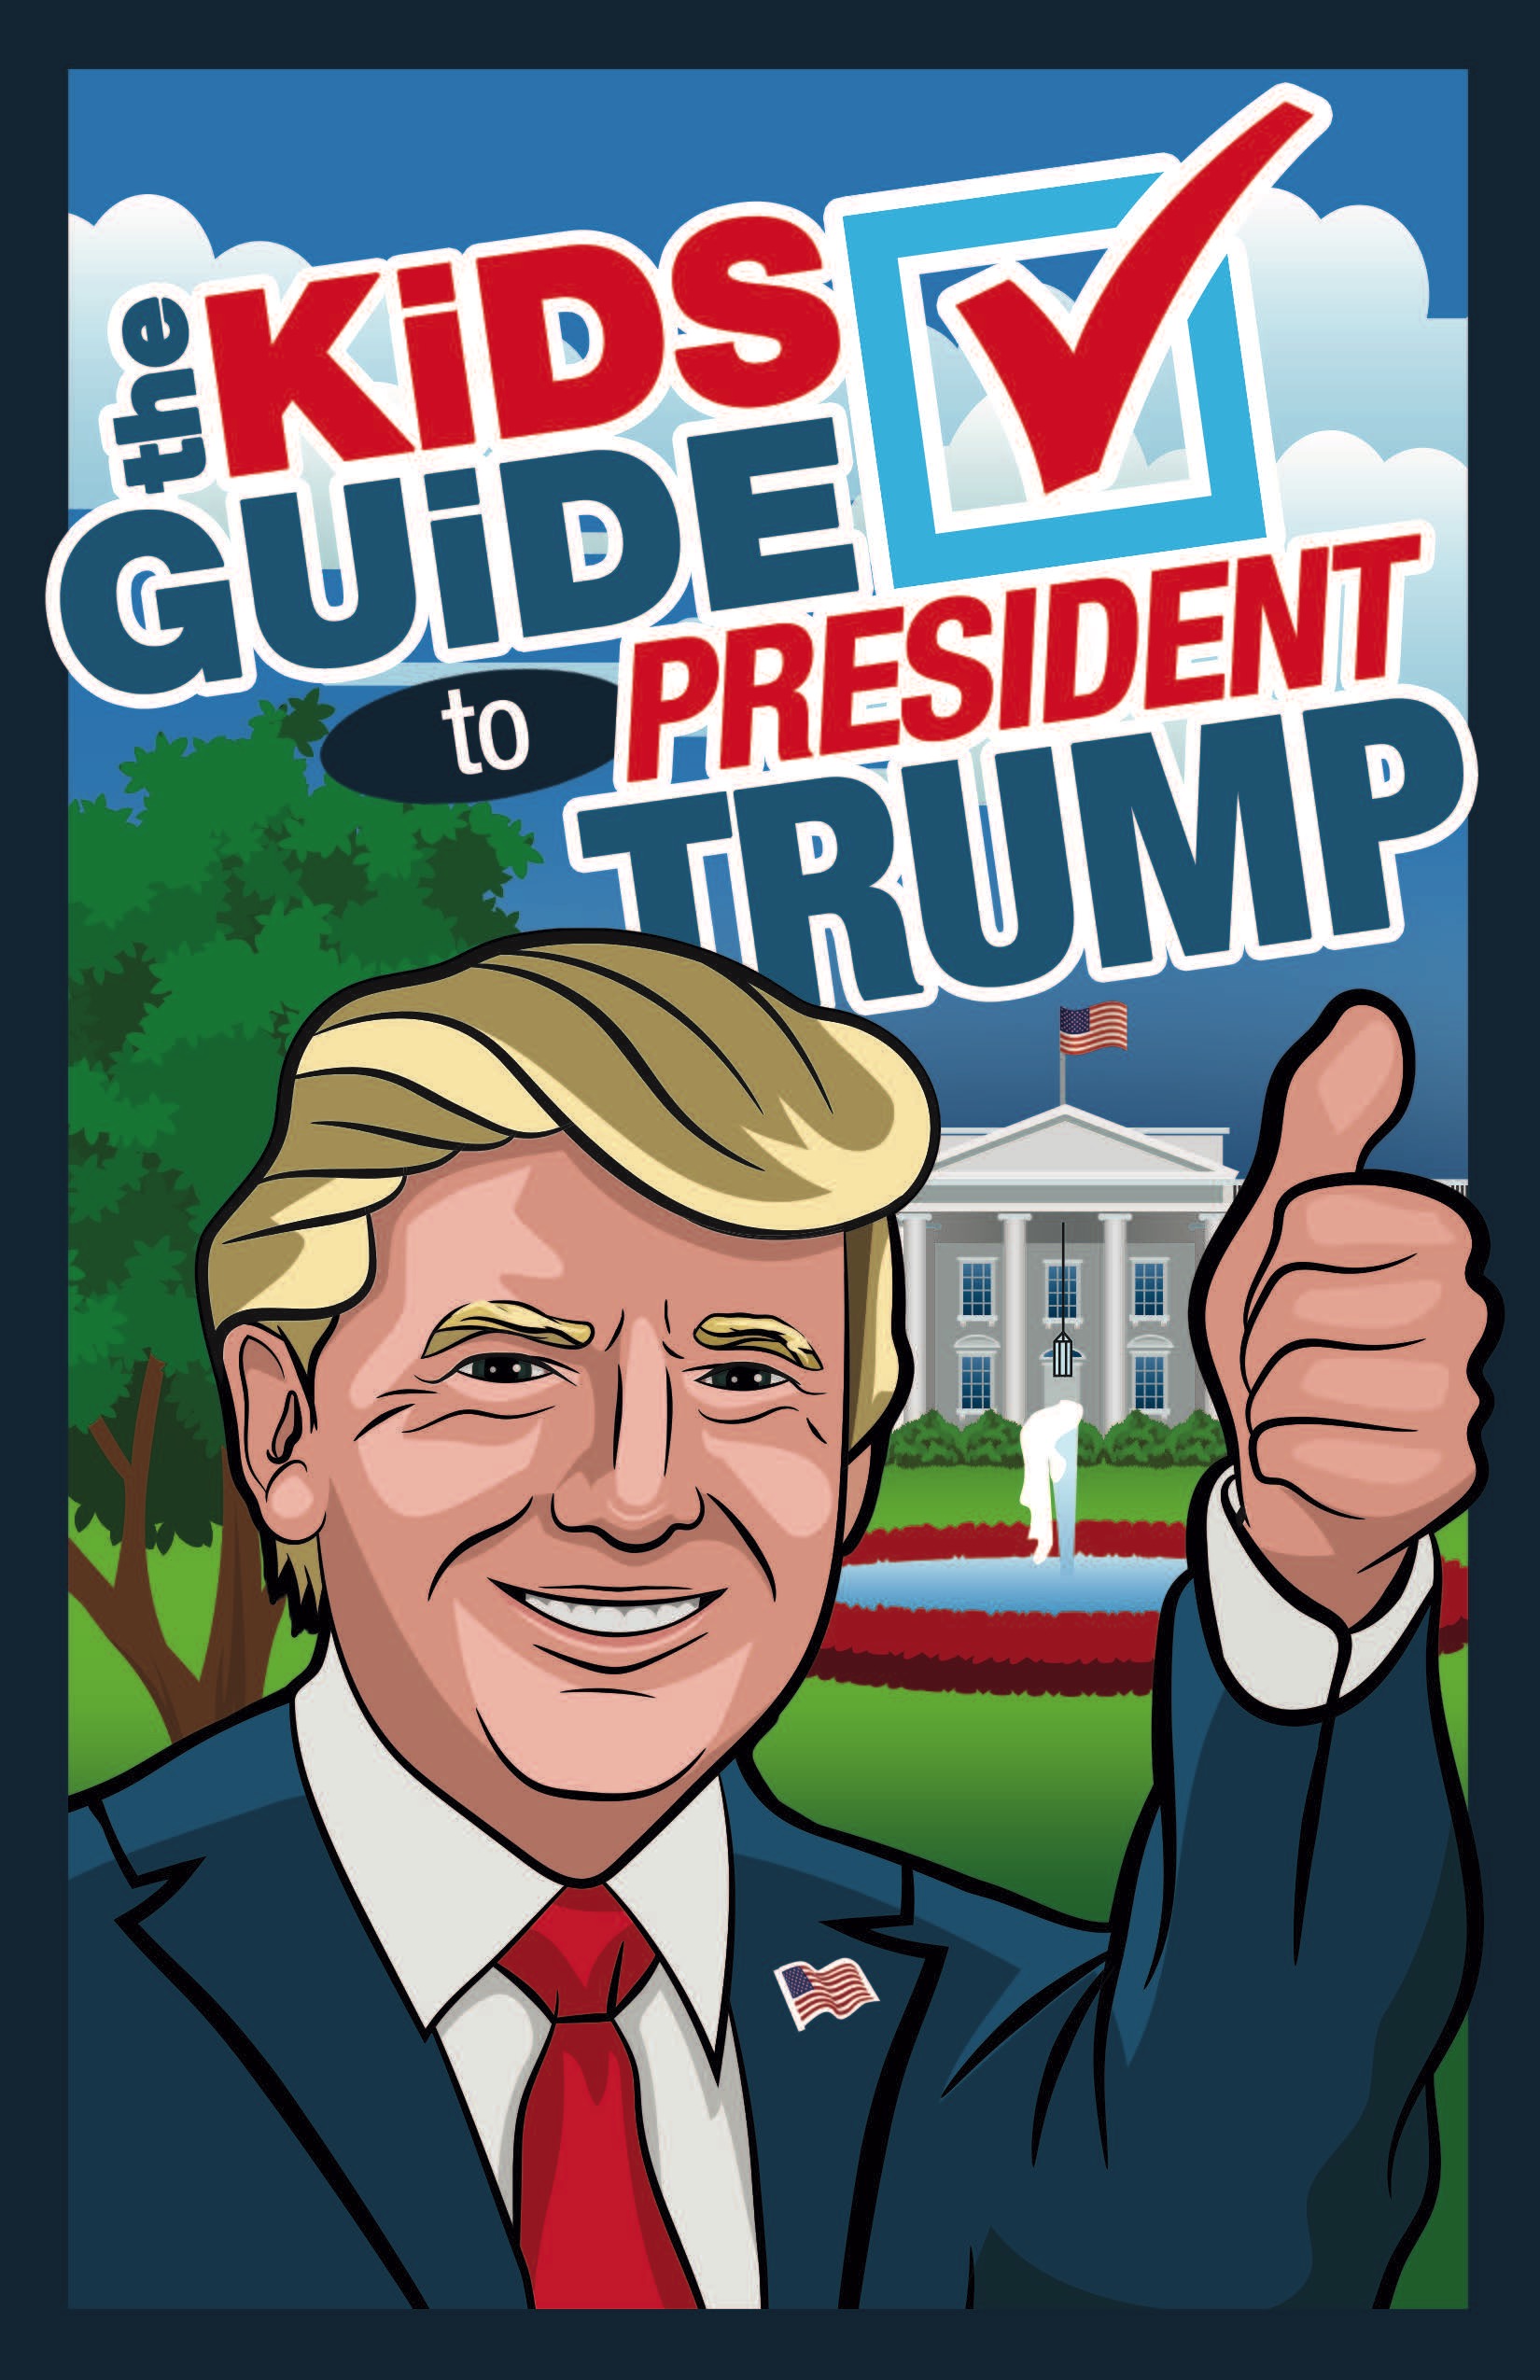 The%20Kids%20Guide%20to%20President%20Trump-1.jpg